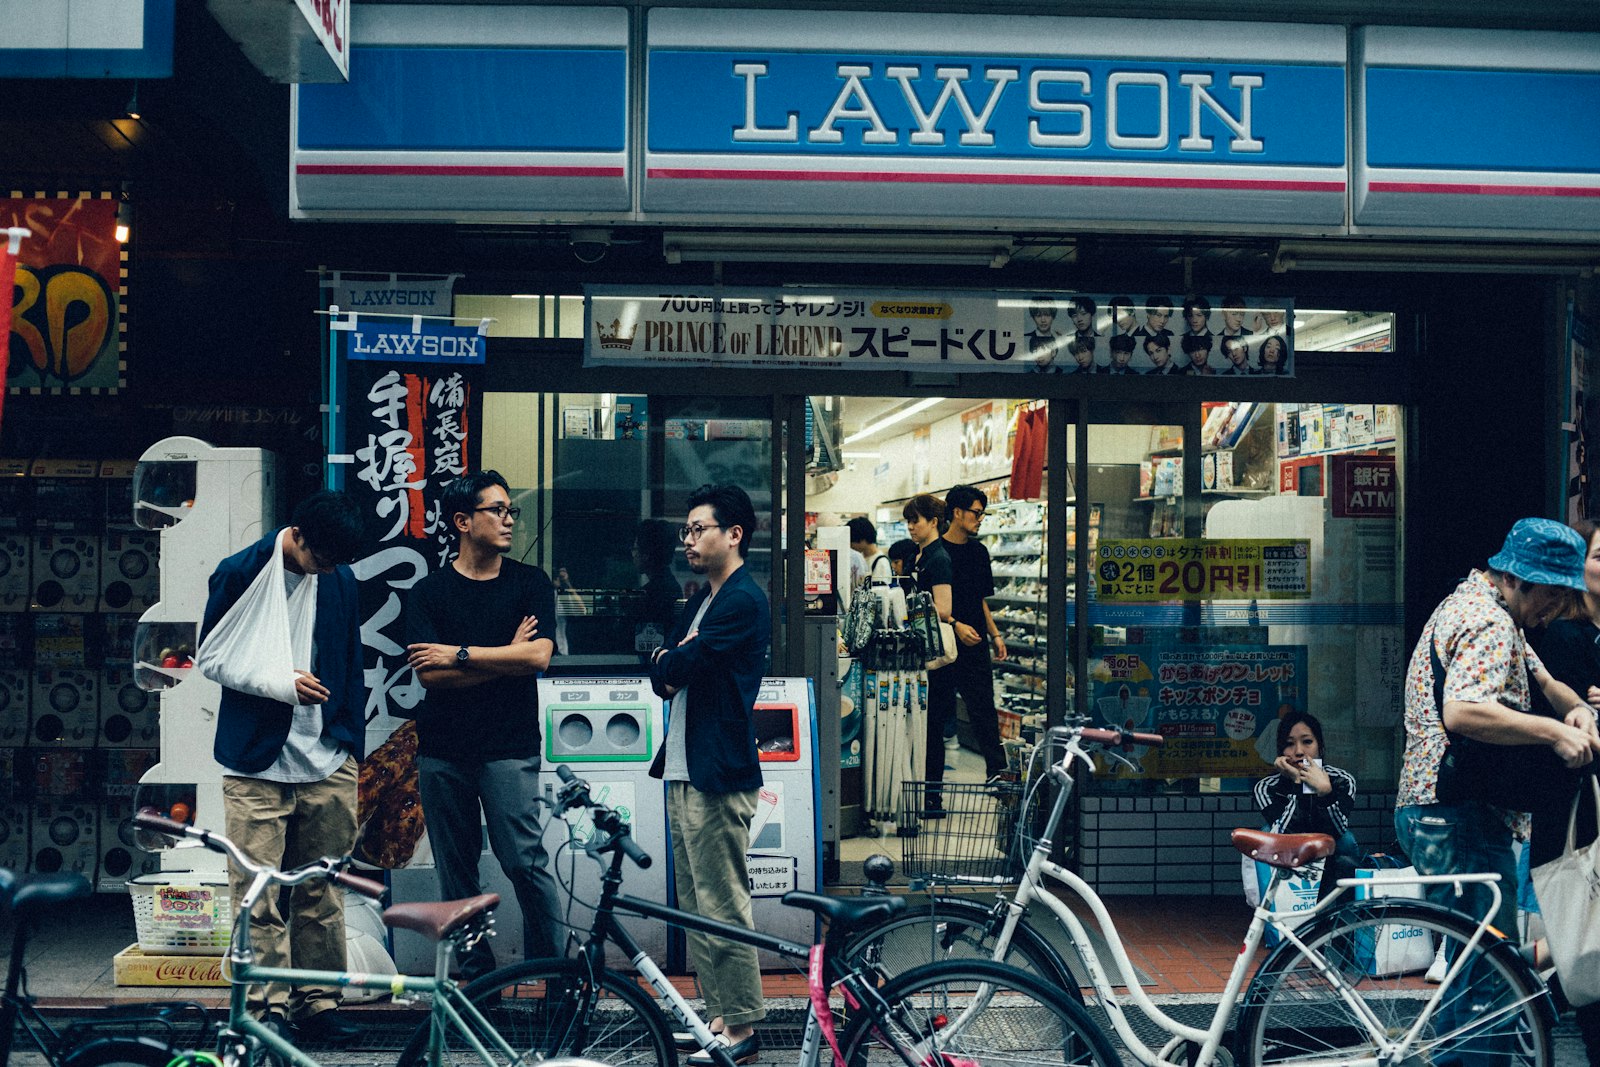 Minolta AF 50mm F1.4 [New] sample photo. People standing near lawson photography